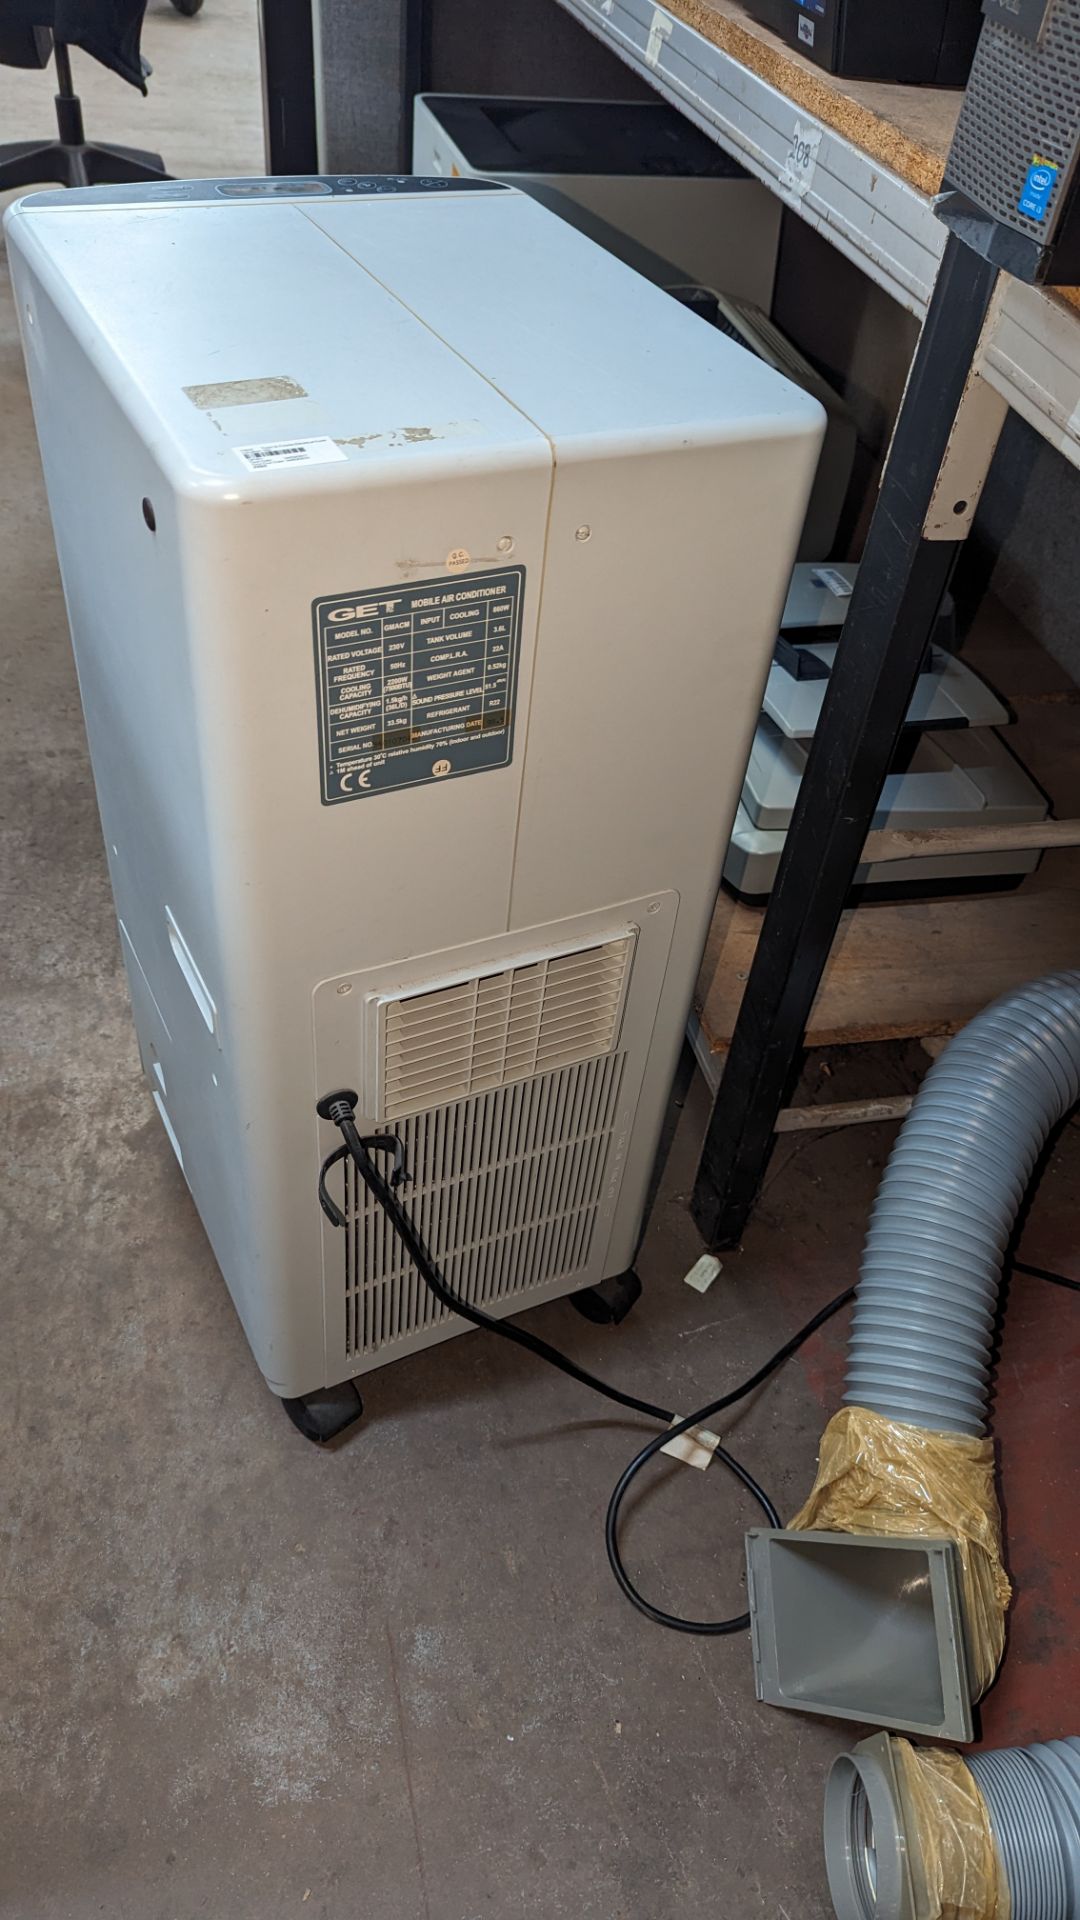 Get mobile air conditioning unit - Image 6 of 7